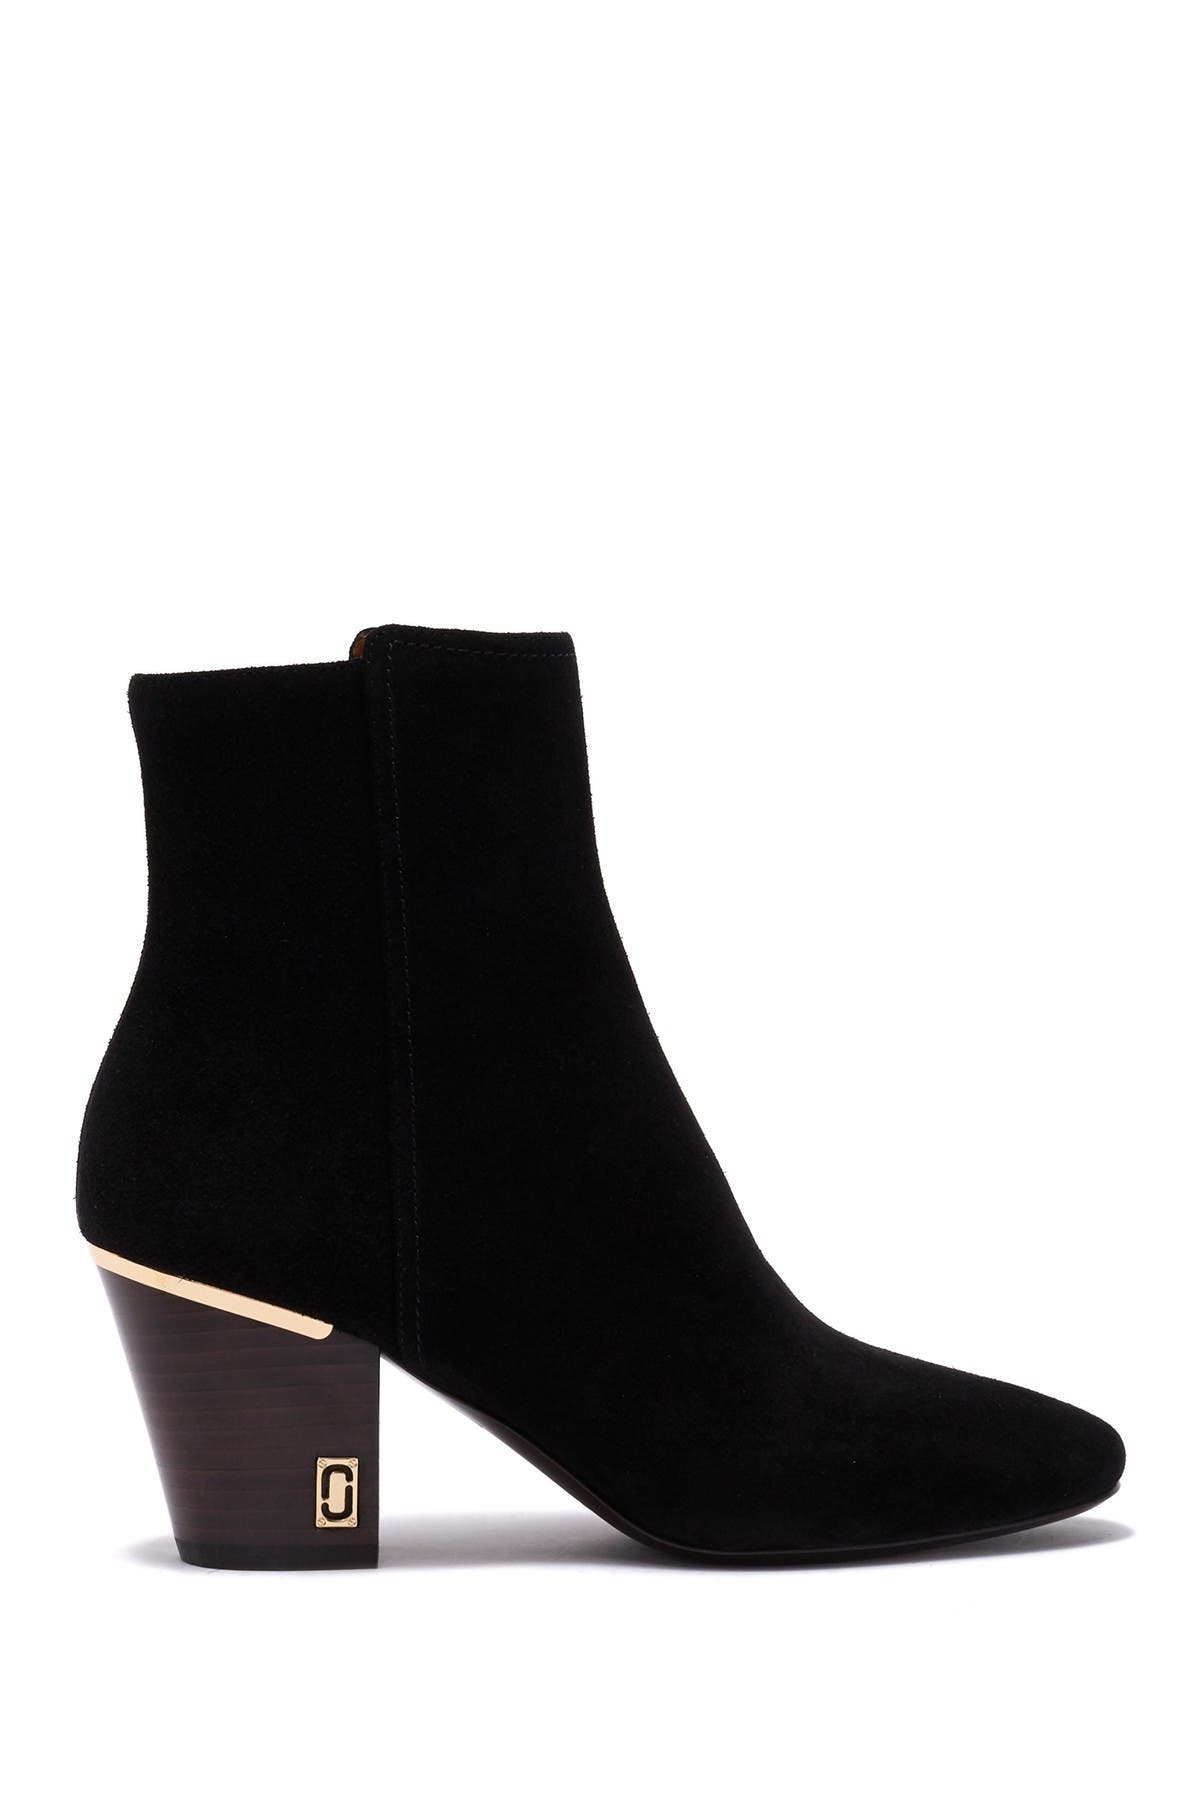 marc jacobs aria status ankle boot